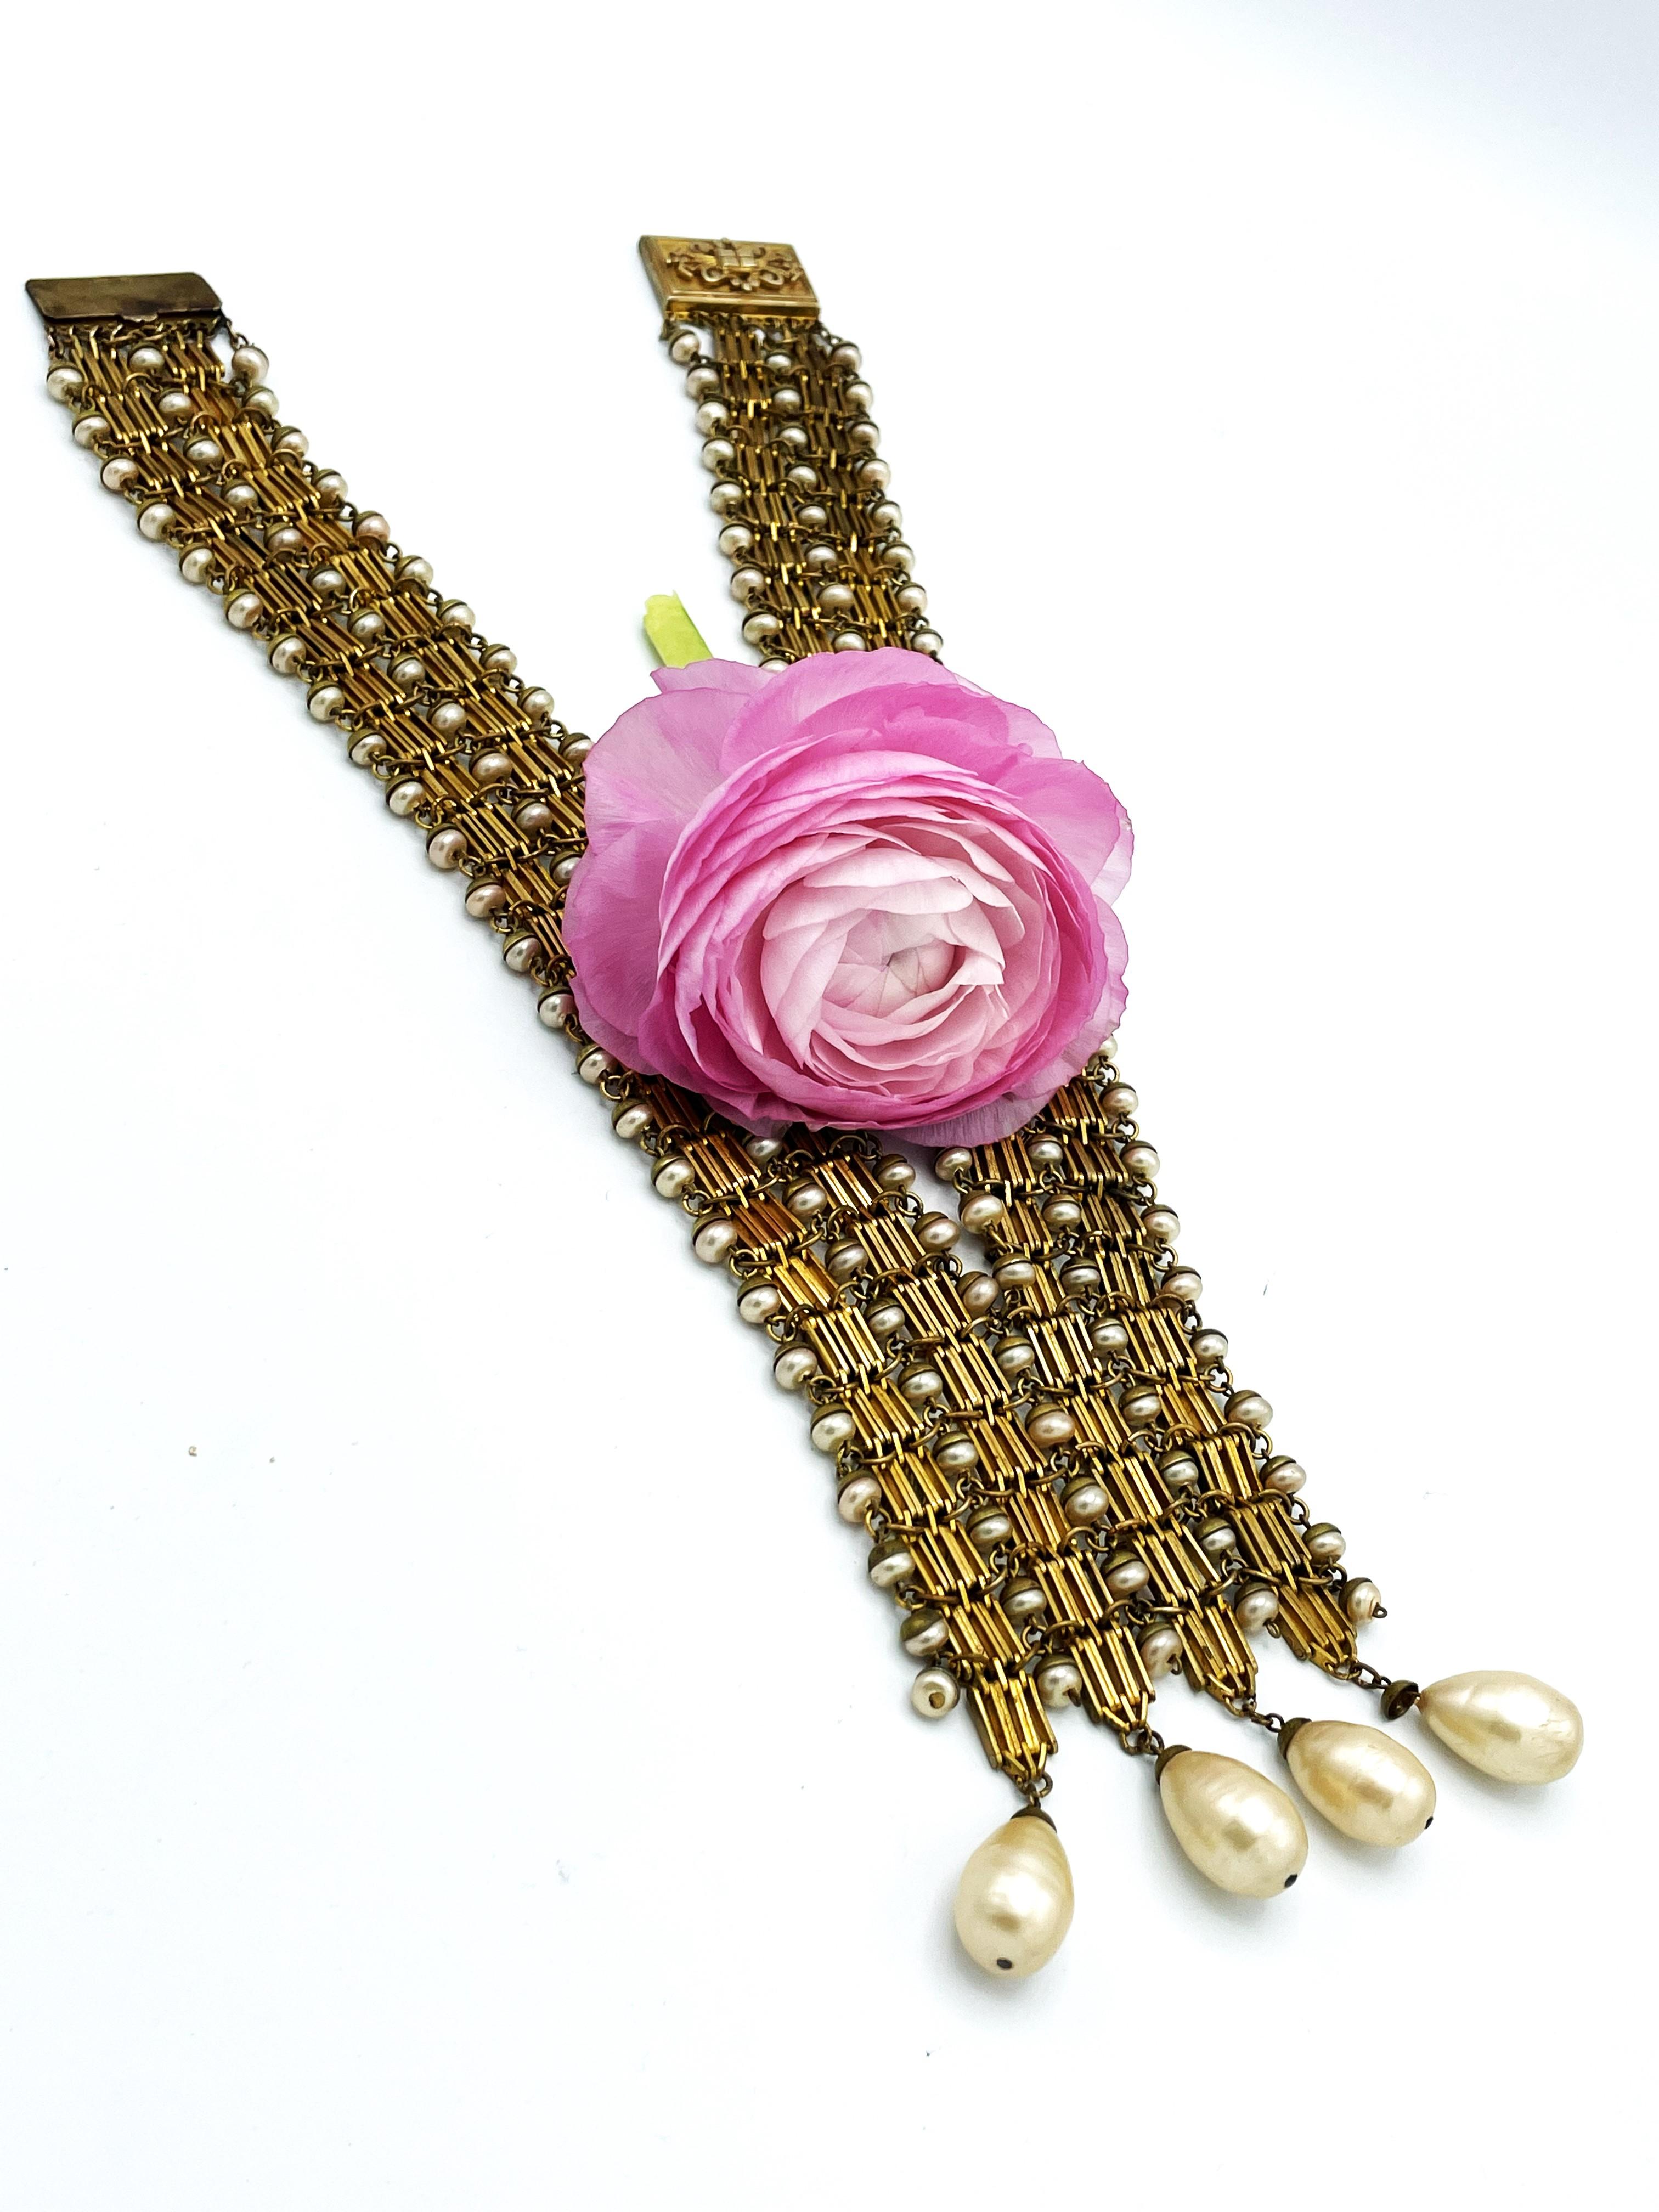  V-SHAPED NECKLACE, early 1940's, gold plated, handmade pearls, Made in France  In Good Condition For Sale In Stuttgart, DE